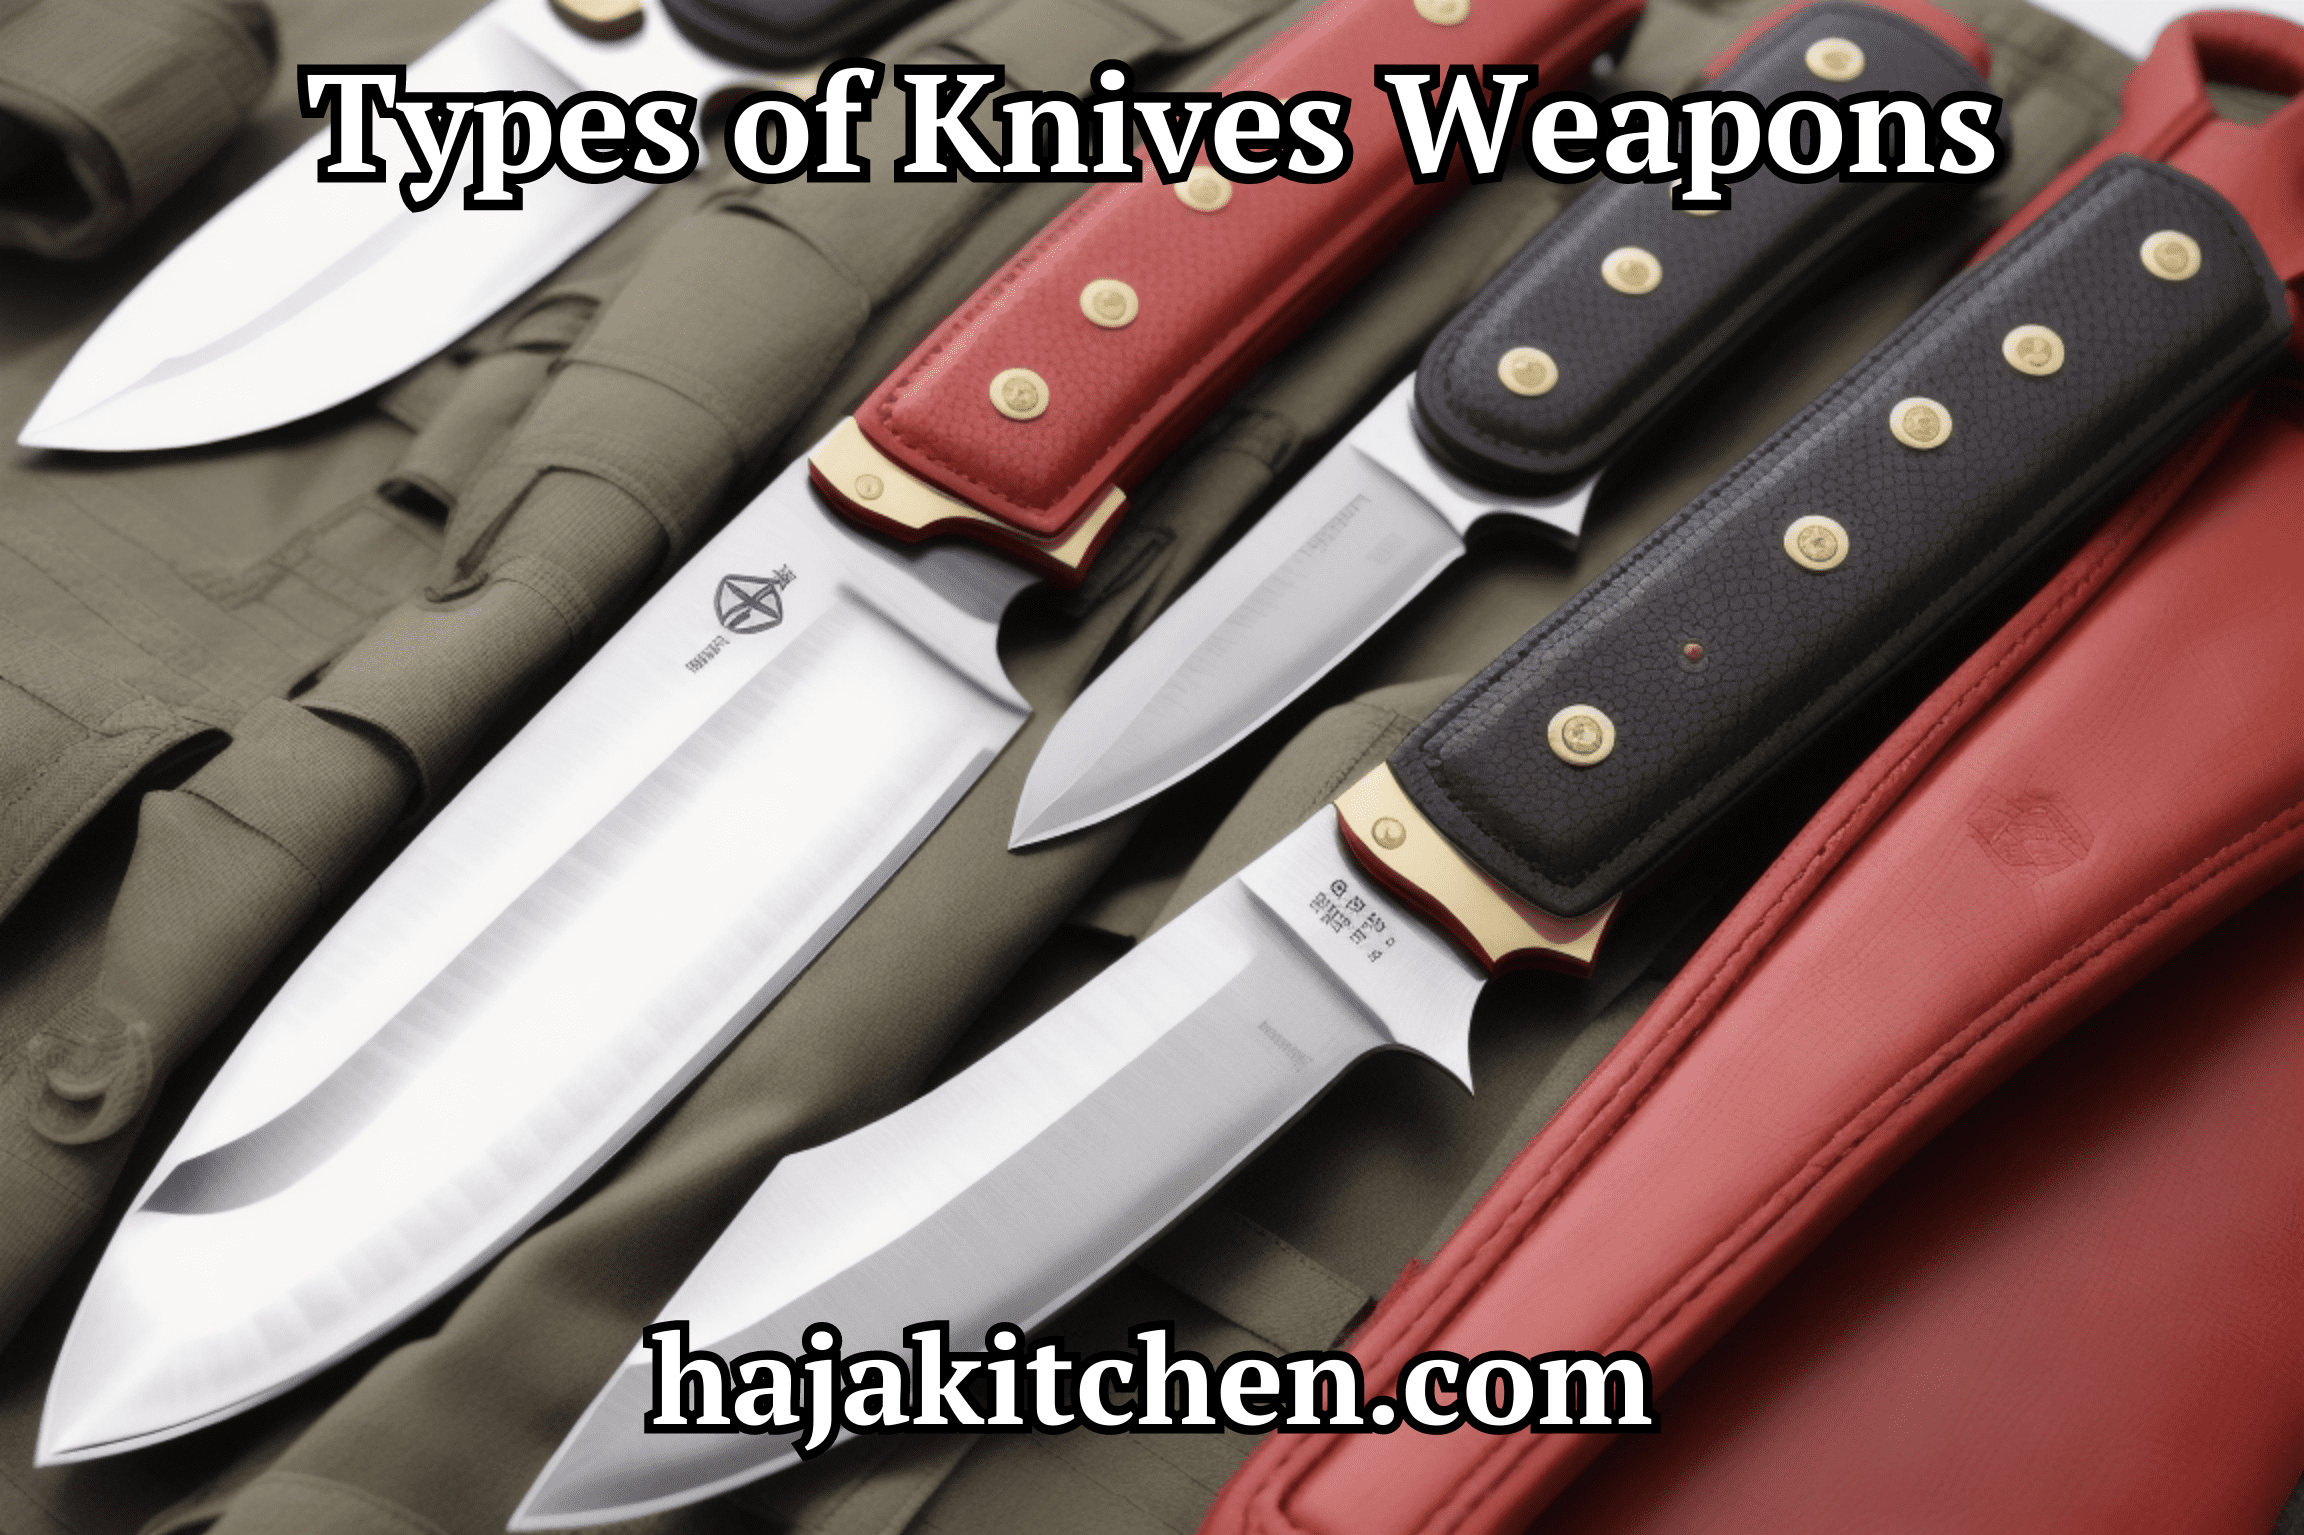 Types of Knives Weapons